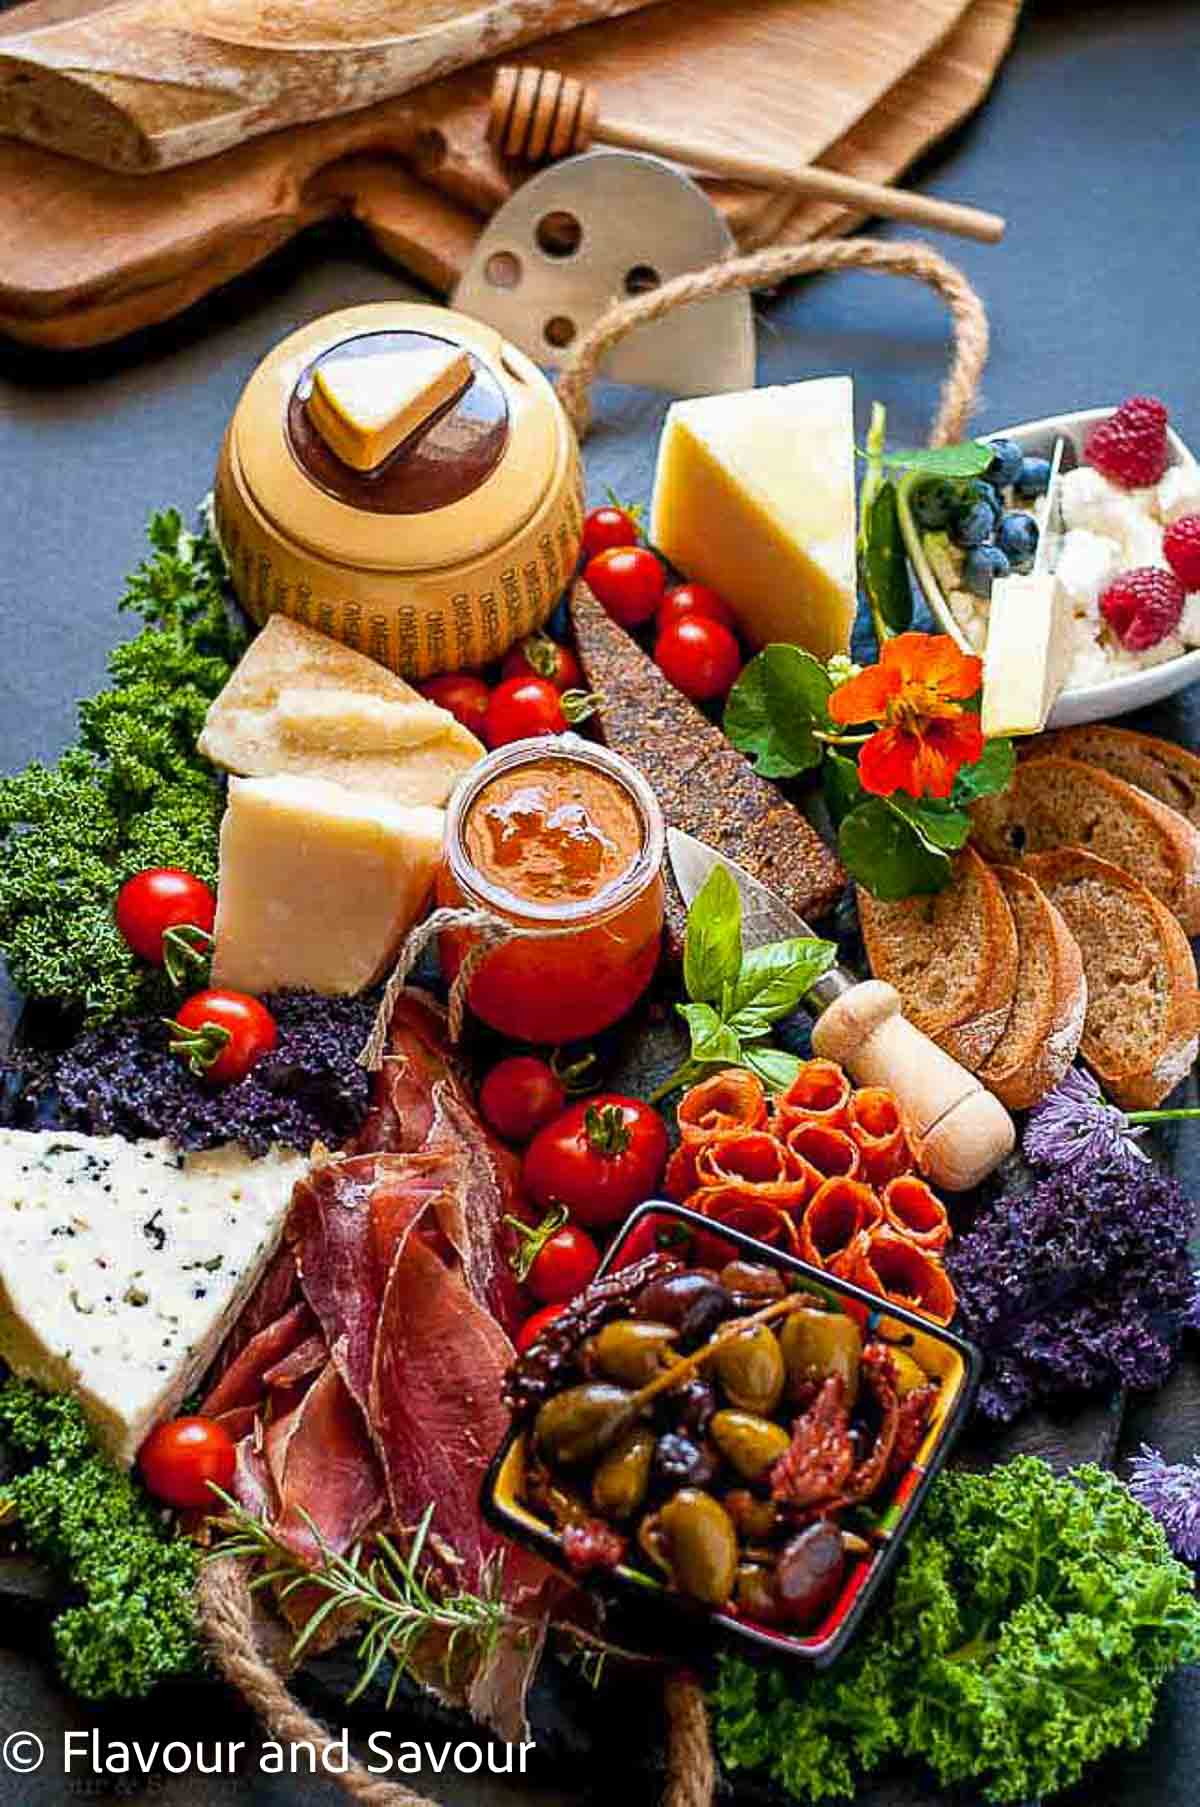 An antipasto platter with meats, olives, cheese, dips and vegetables.